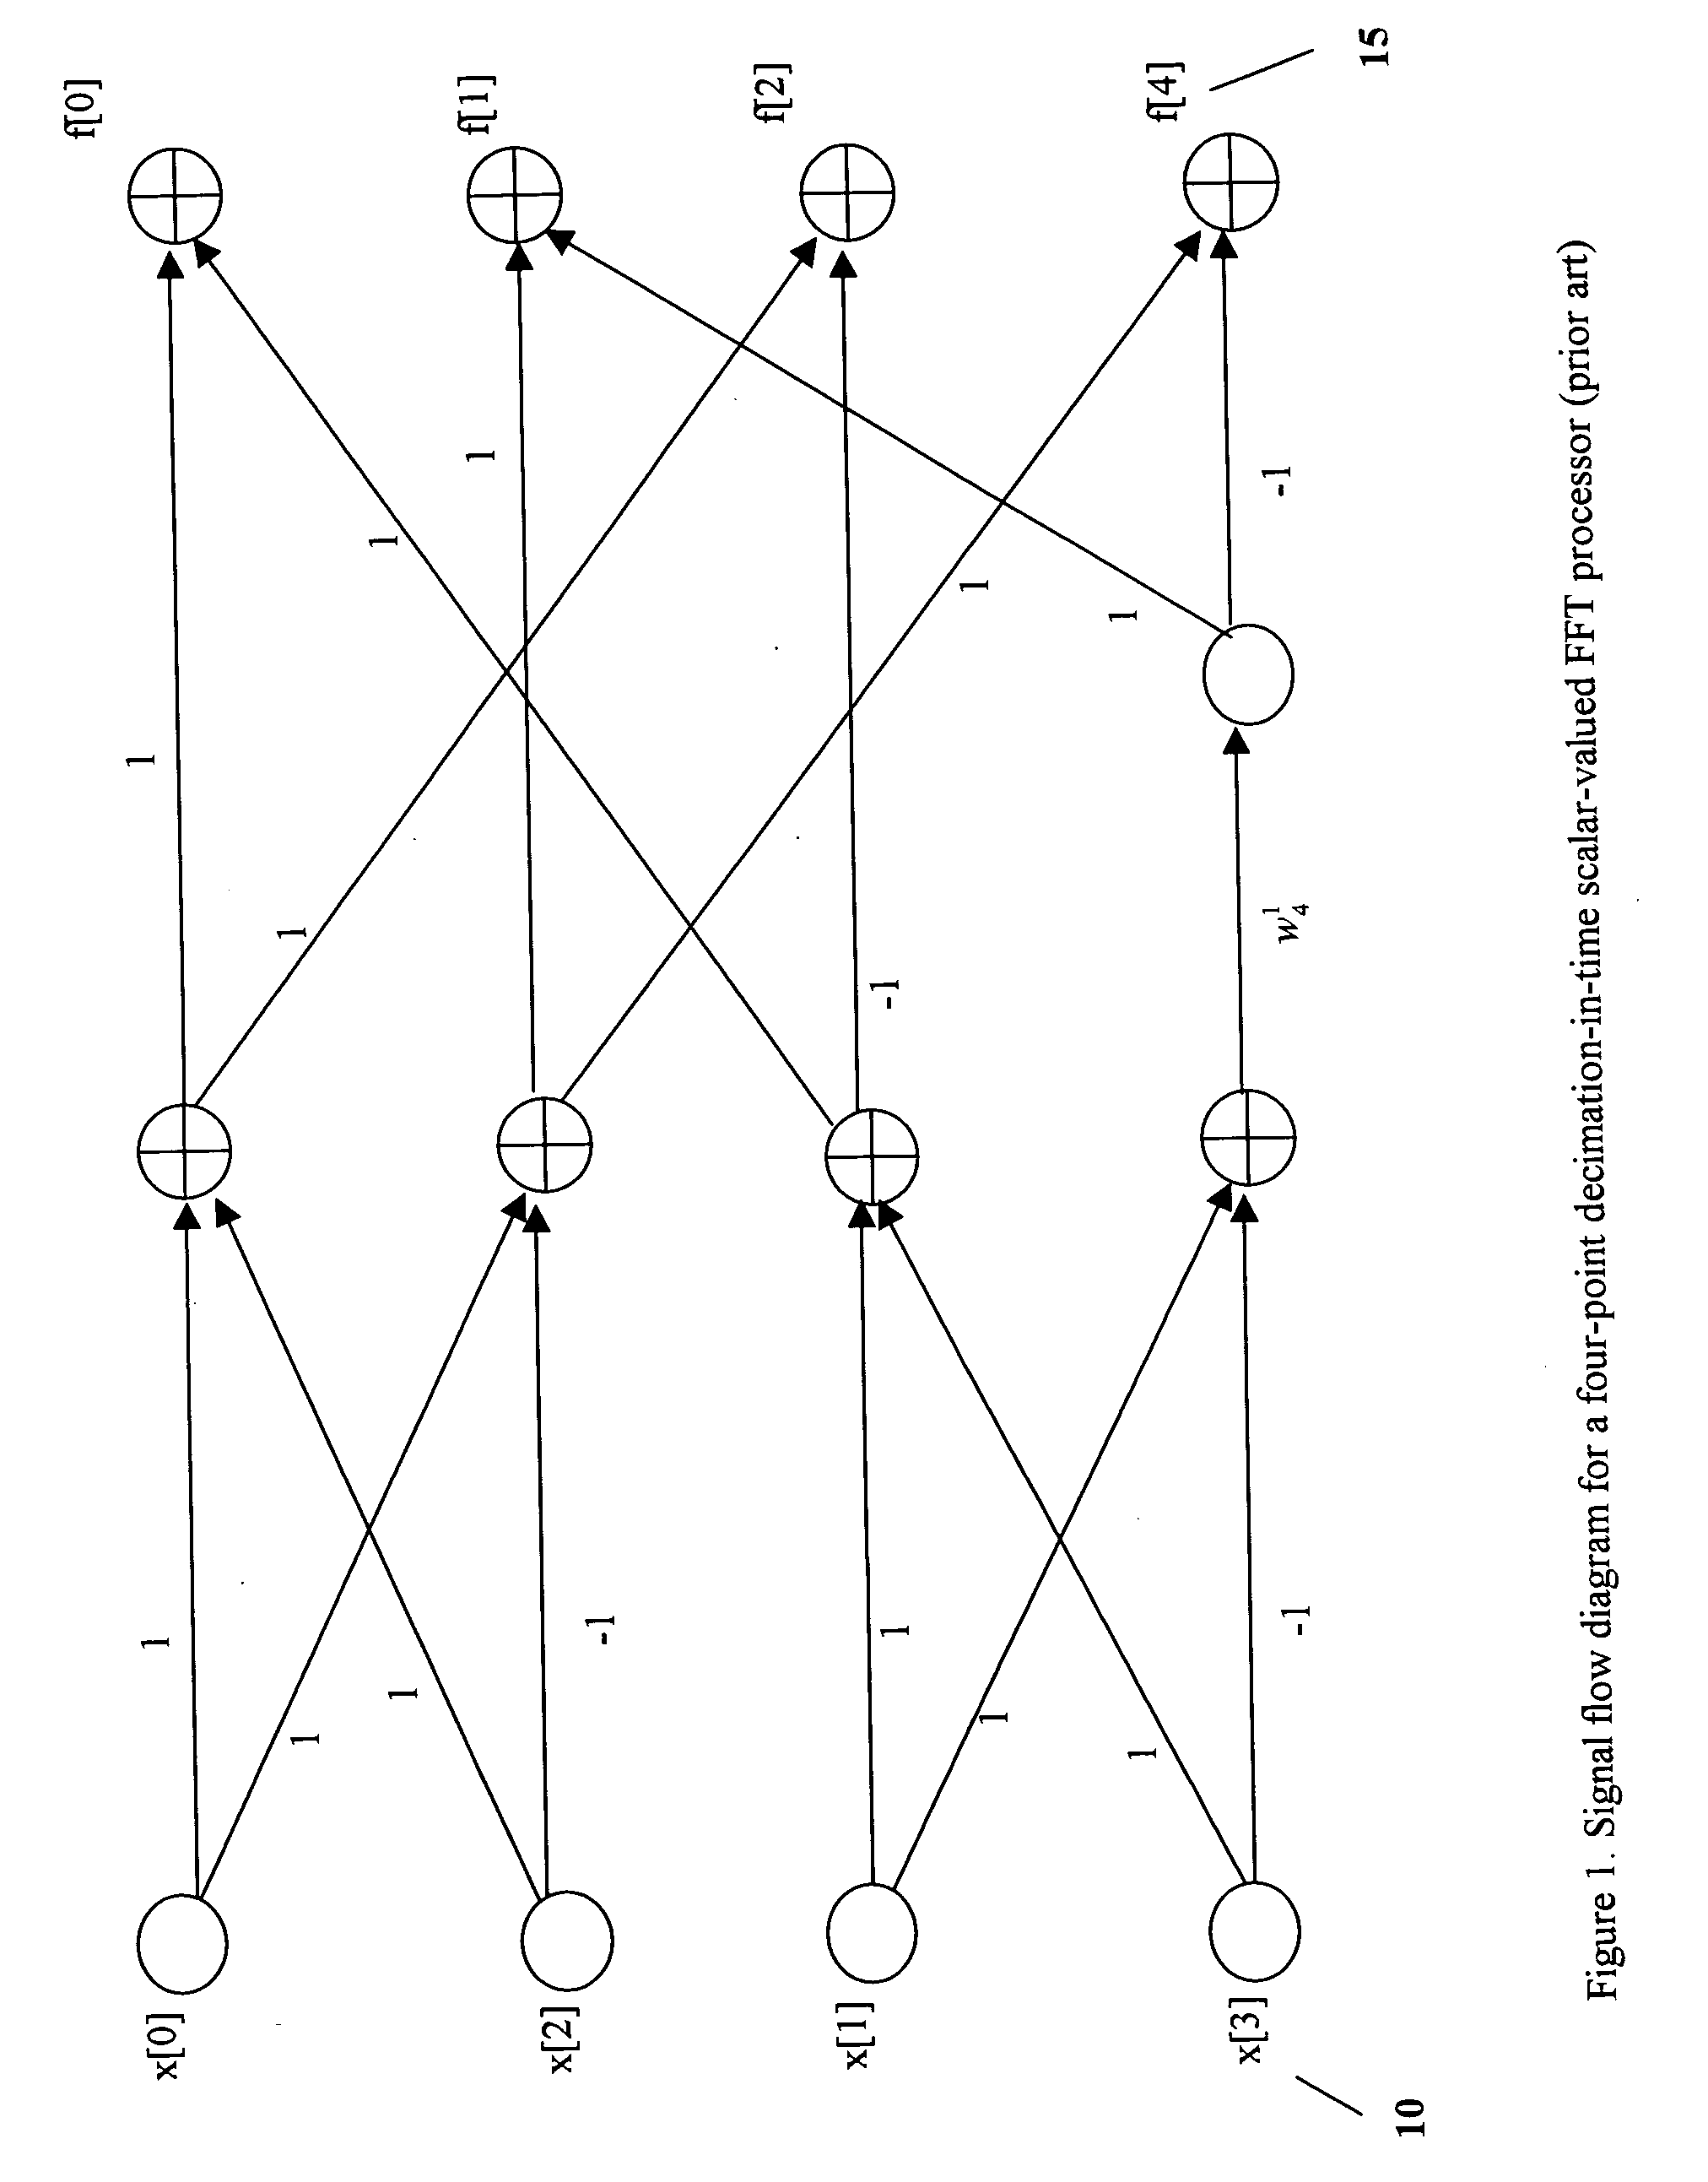 Matrix-valued methods and apparatus for signal processing